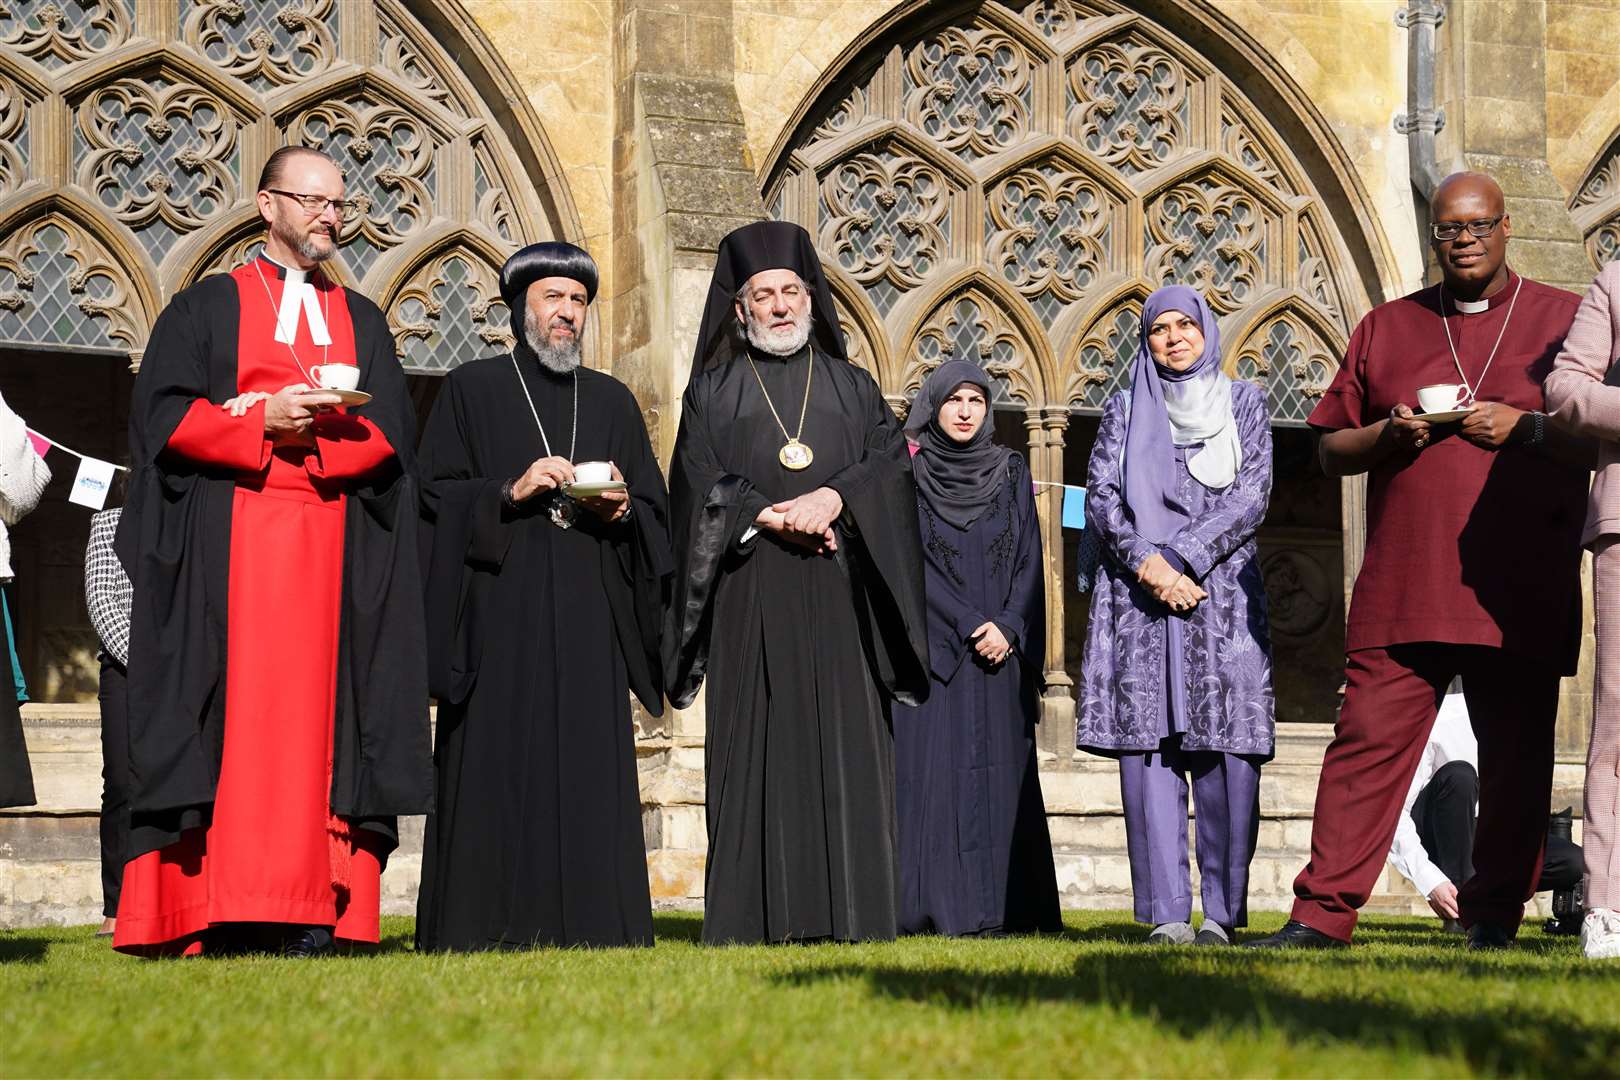 Faith leaders, including Archbishop Angaelos, Archbishop of London, Coptic Orthodox Church (second left), Archbishop Nikitas, Greek Orthodox Archbishop of Great Britain (third left) and Bishop Mike Royal, general secretary, Churches Together England attended the lunch (James Manning/PA)